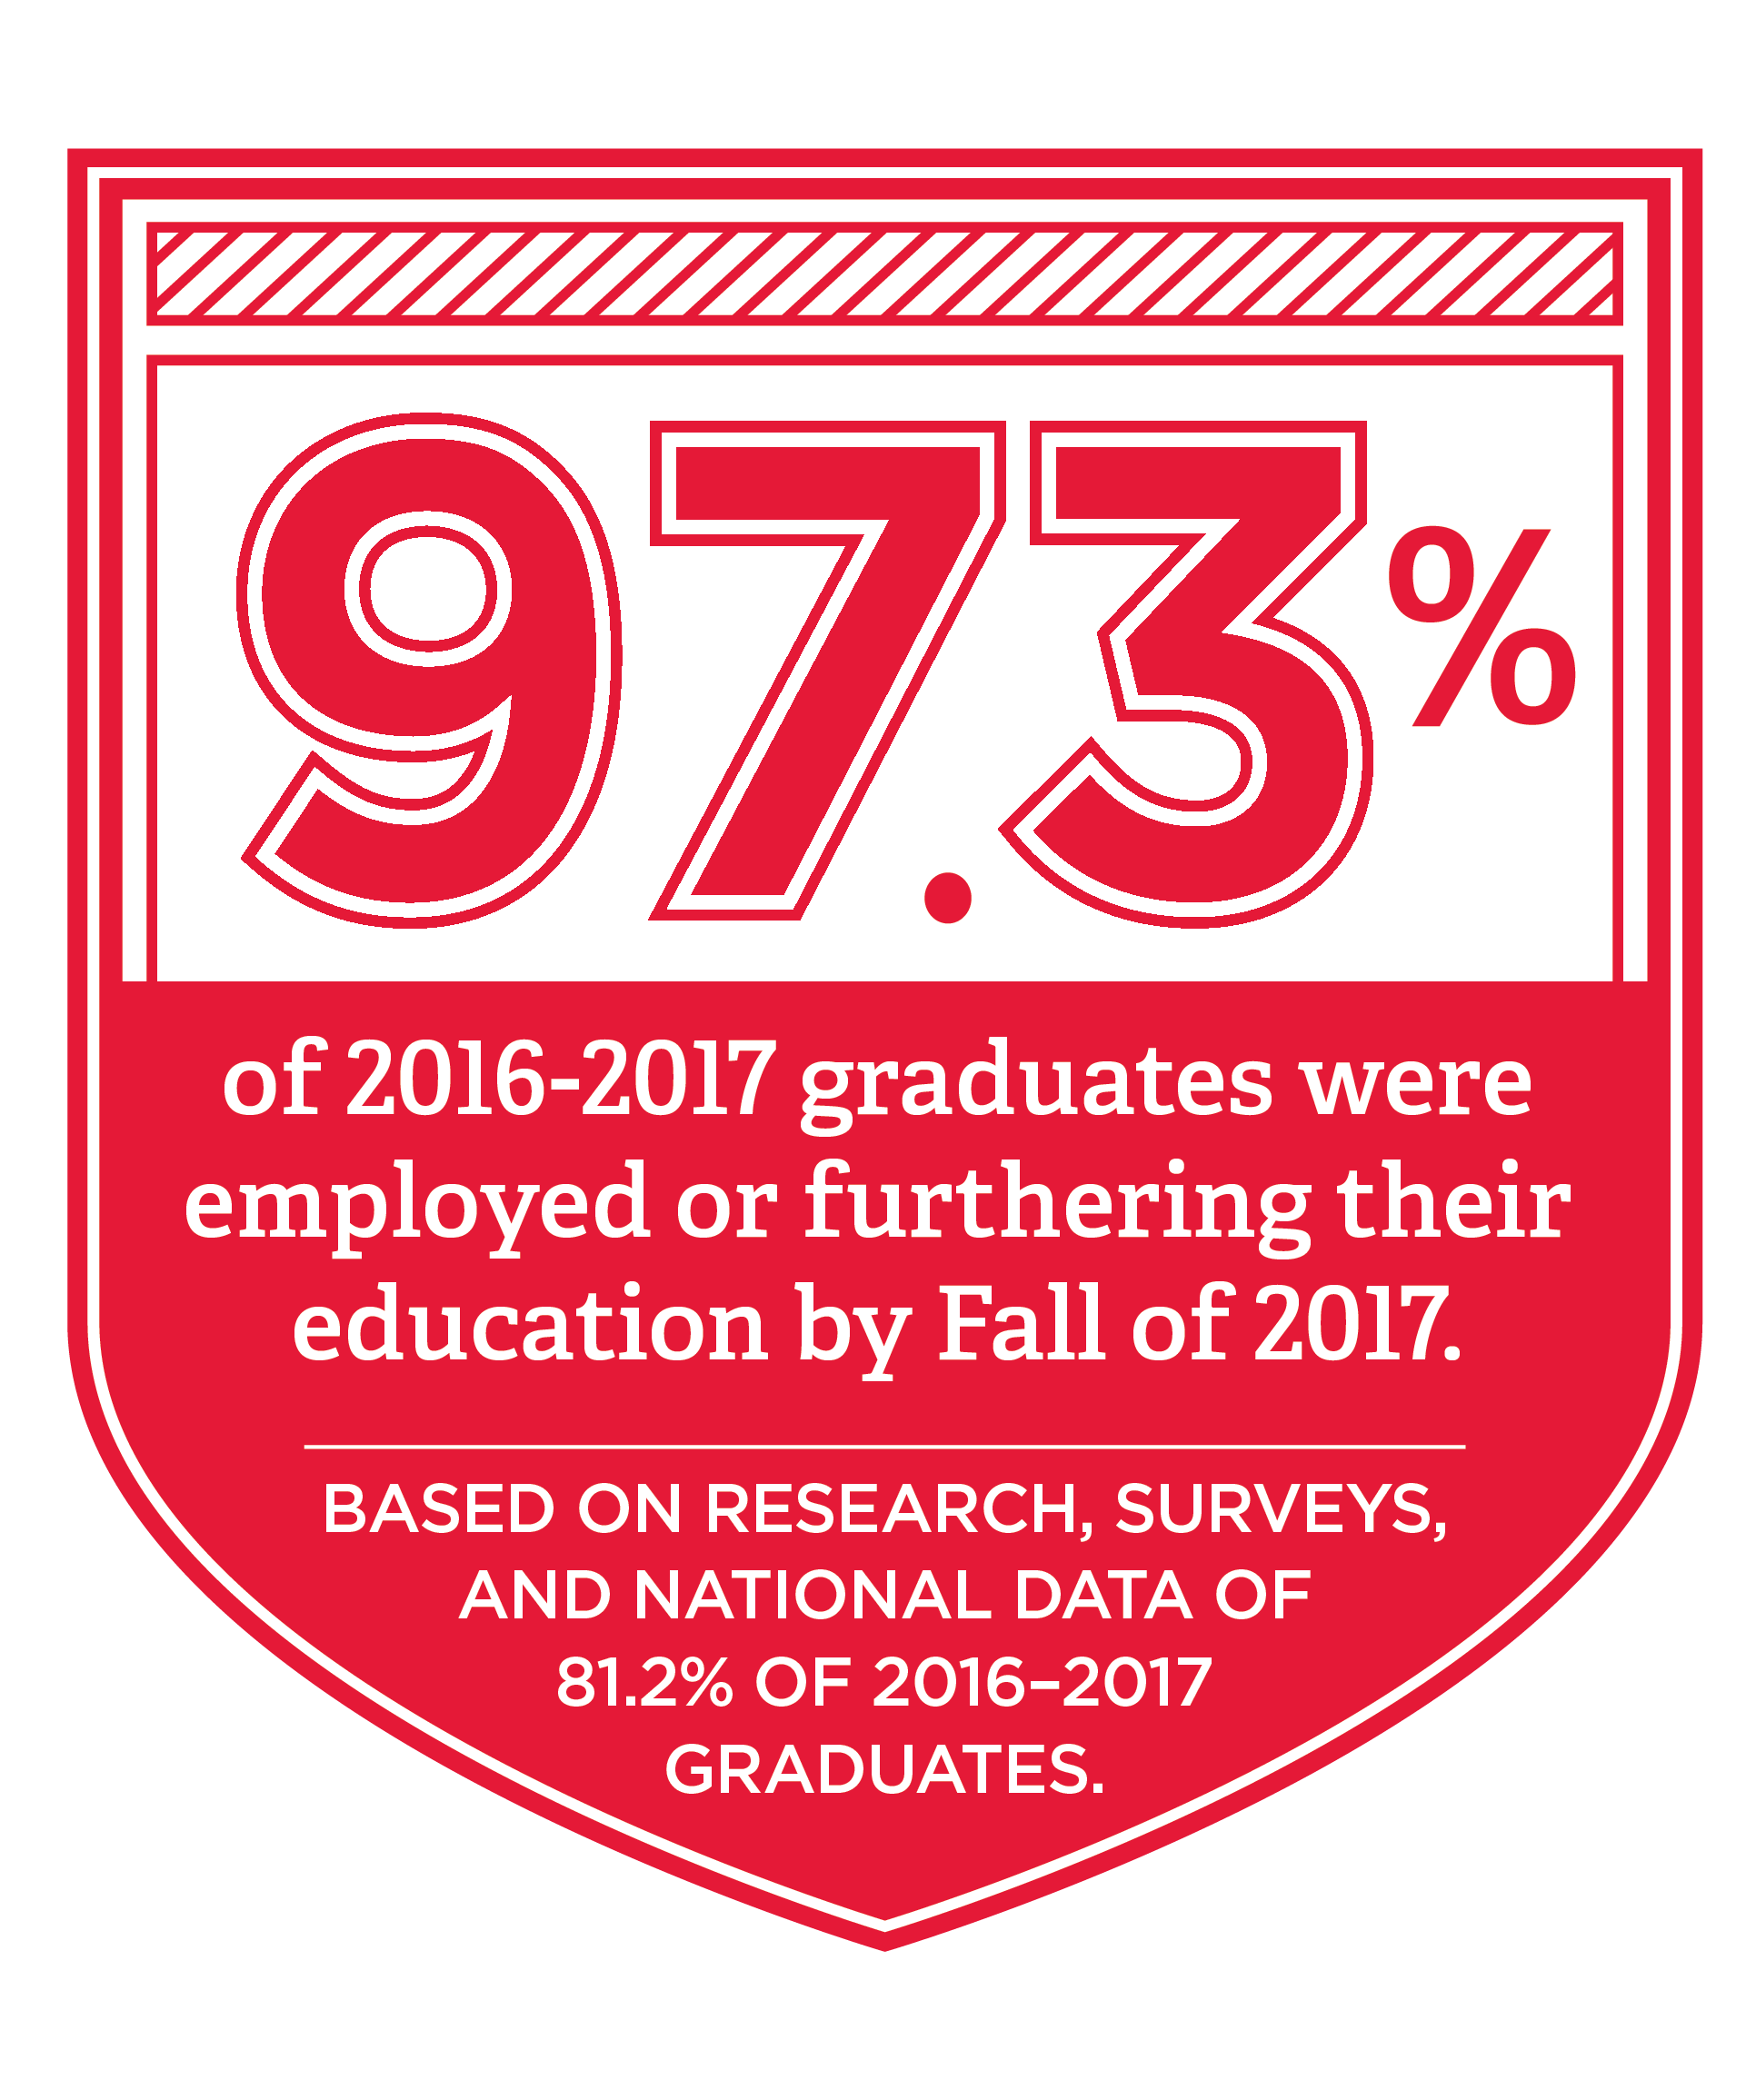 97.3% of 2016-2017 graduates were employed or furthering their education by fall 2017. Based on research, surveys, and national data of 81.2% of 2016-2017 graduates.